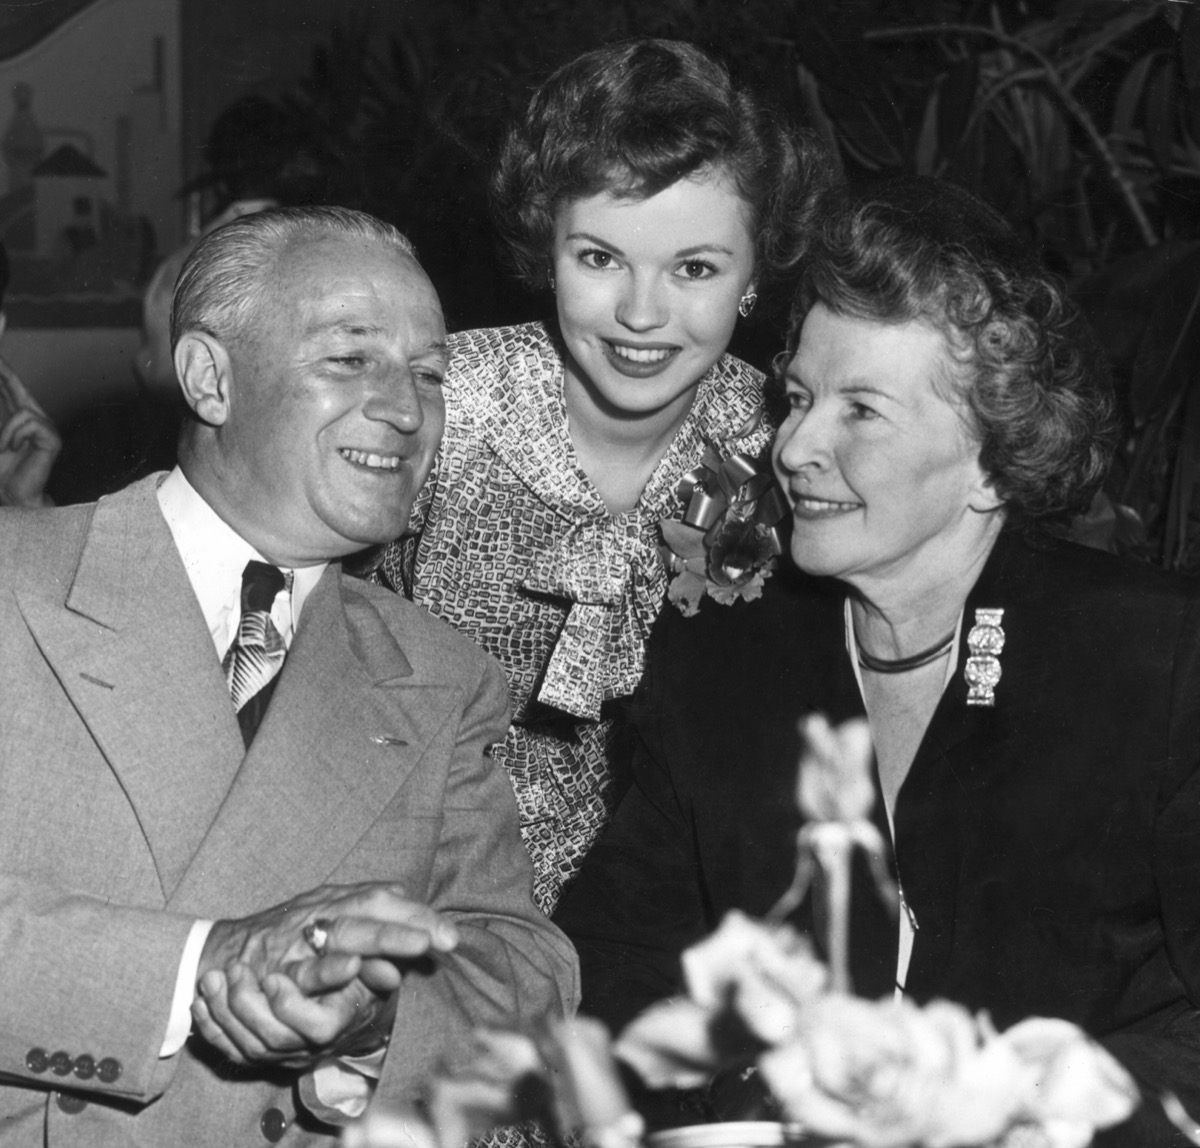 Shirley Temple with her parents George and Gertrude Temple in 1948